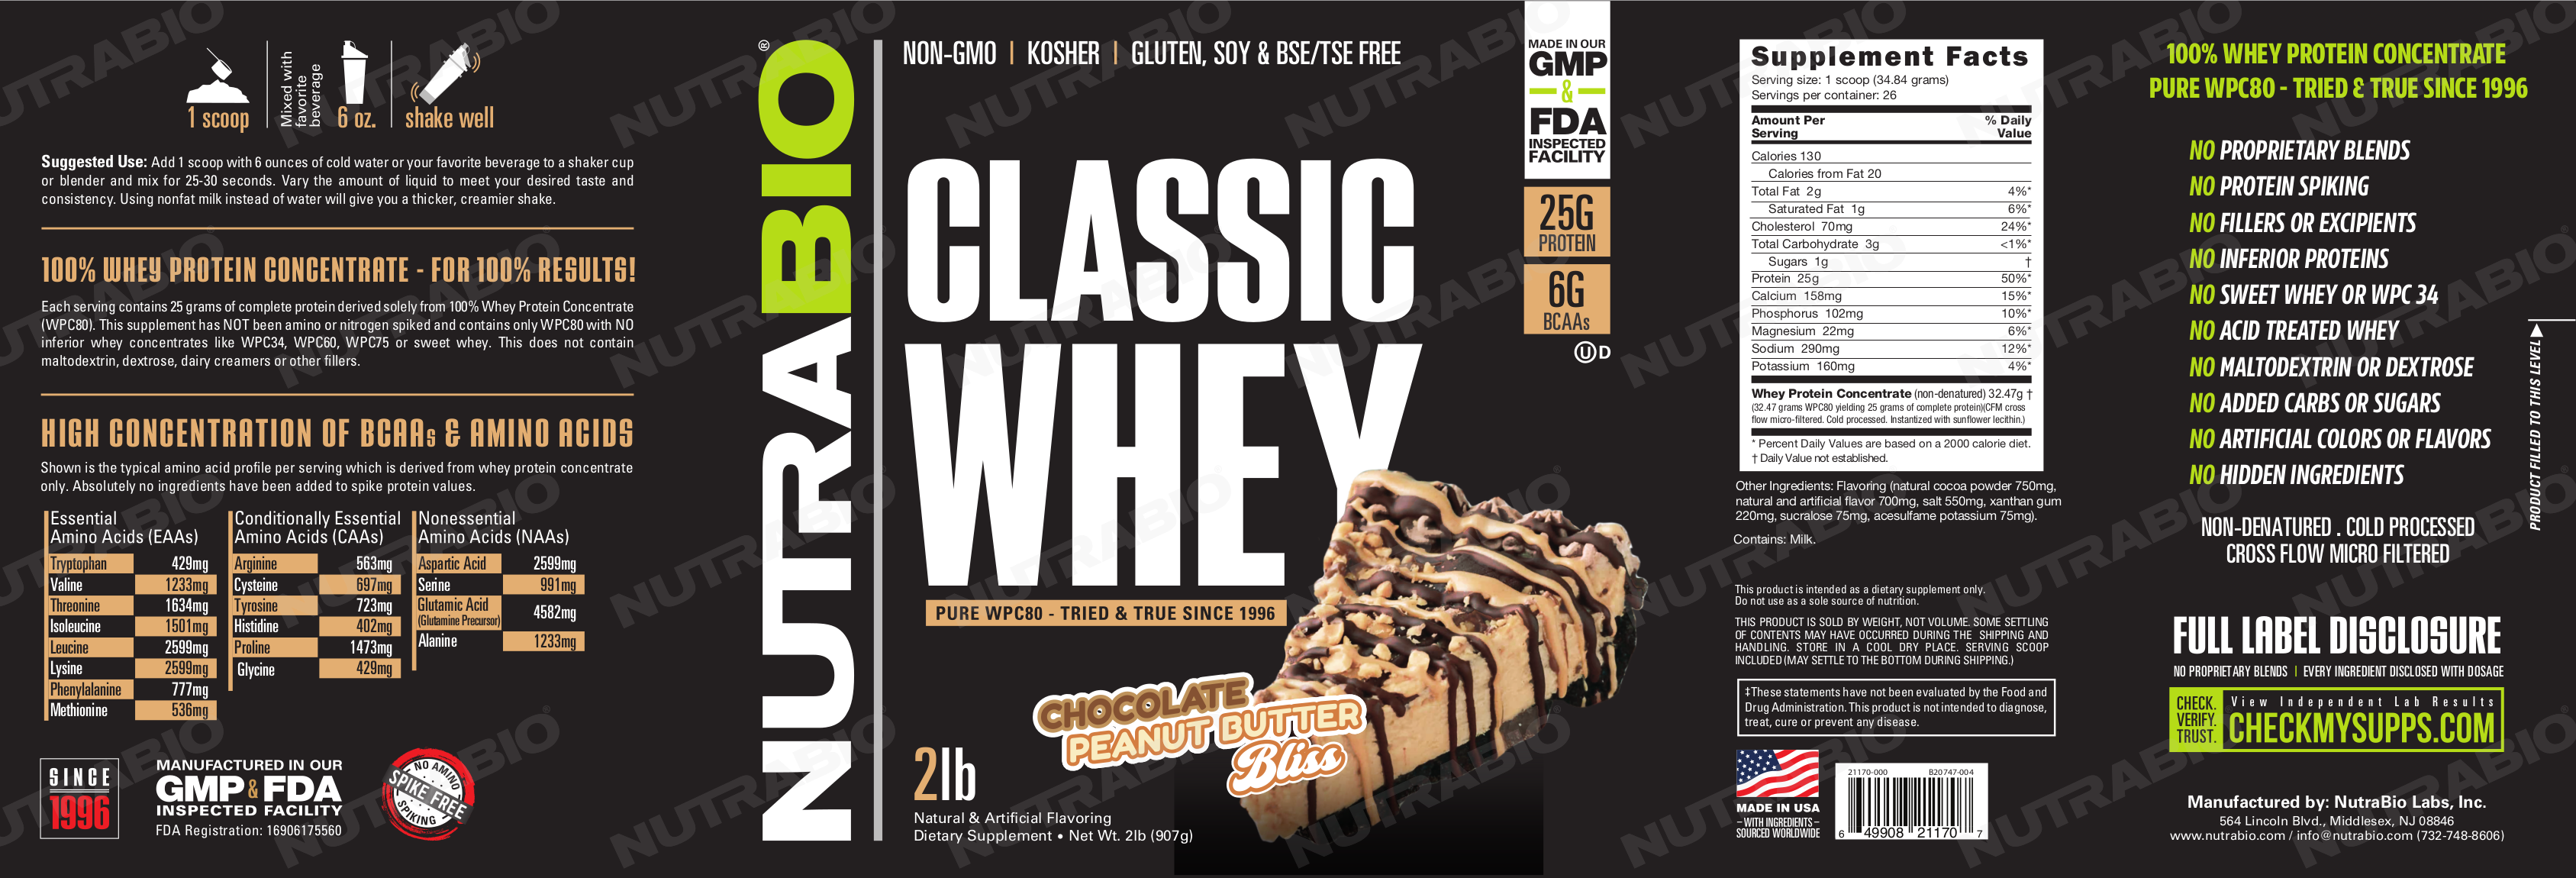 NutraBio Classic Whey Chocolate Peanut Butter Bliss Label